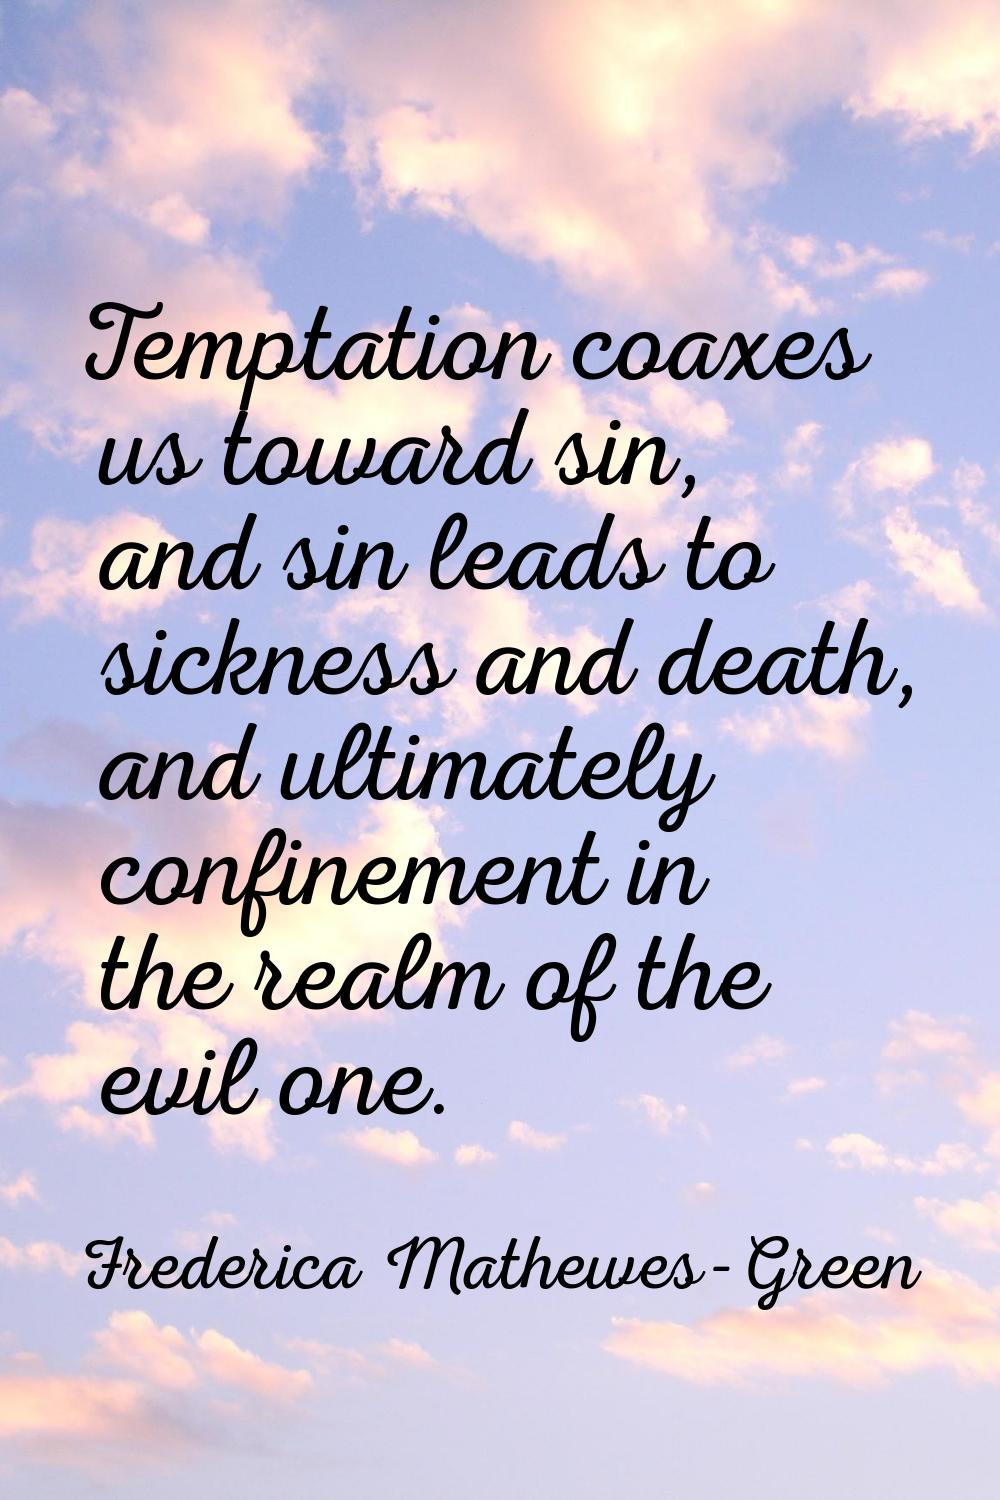 Temptation coaxes us toward sin, and sin leads to sickness and death, and ultimately confinement in